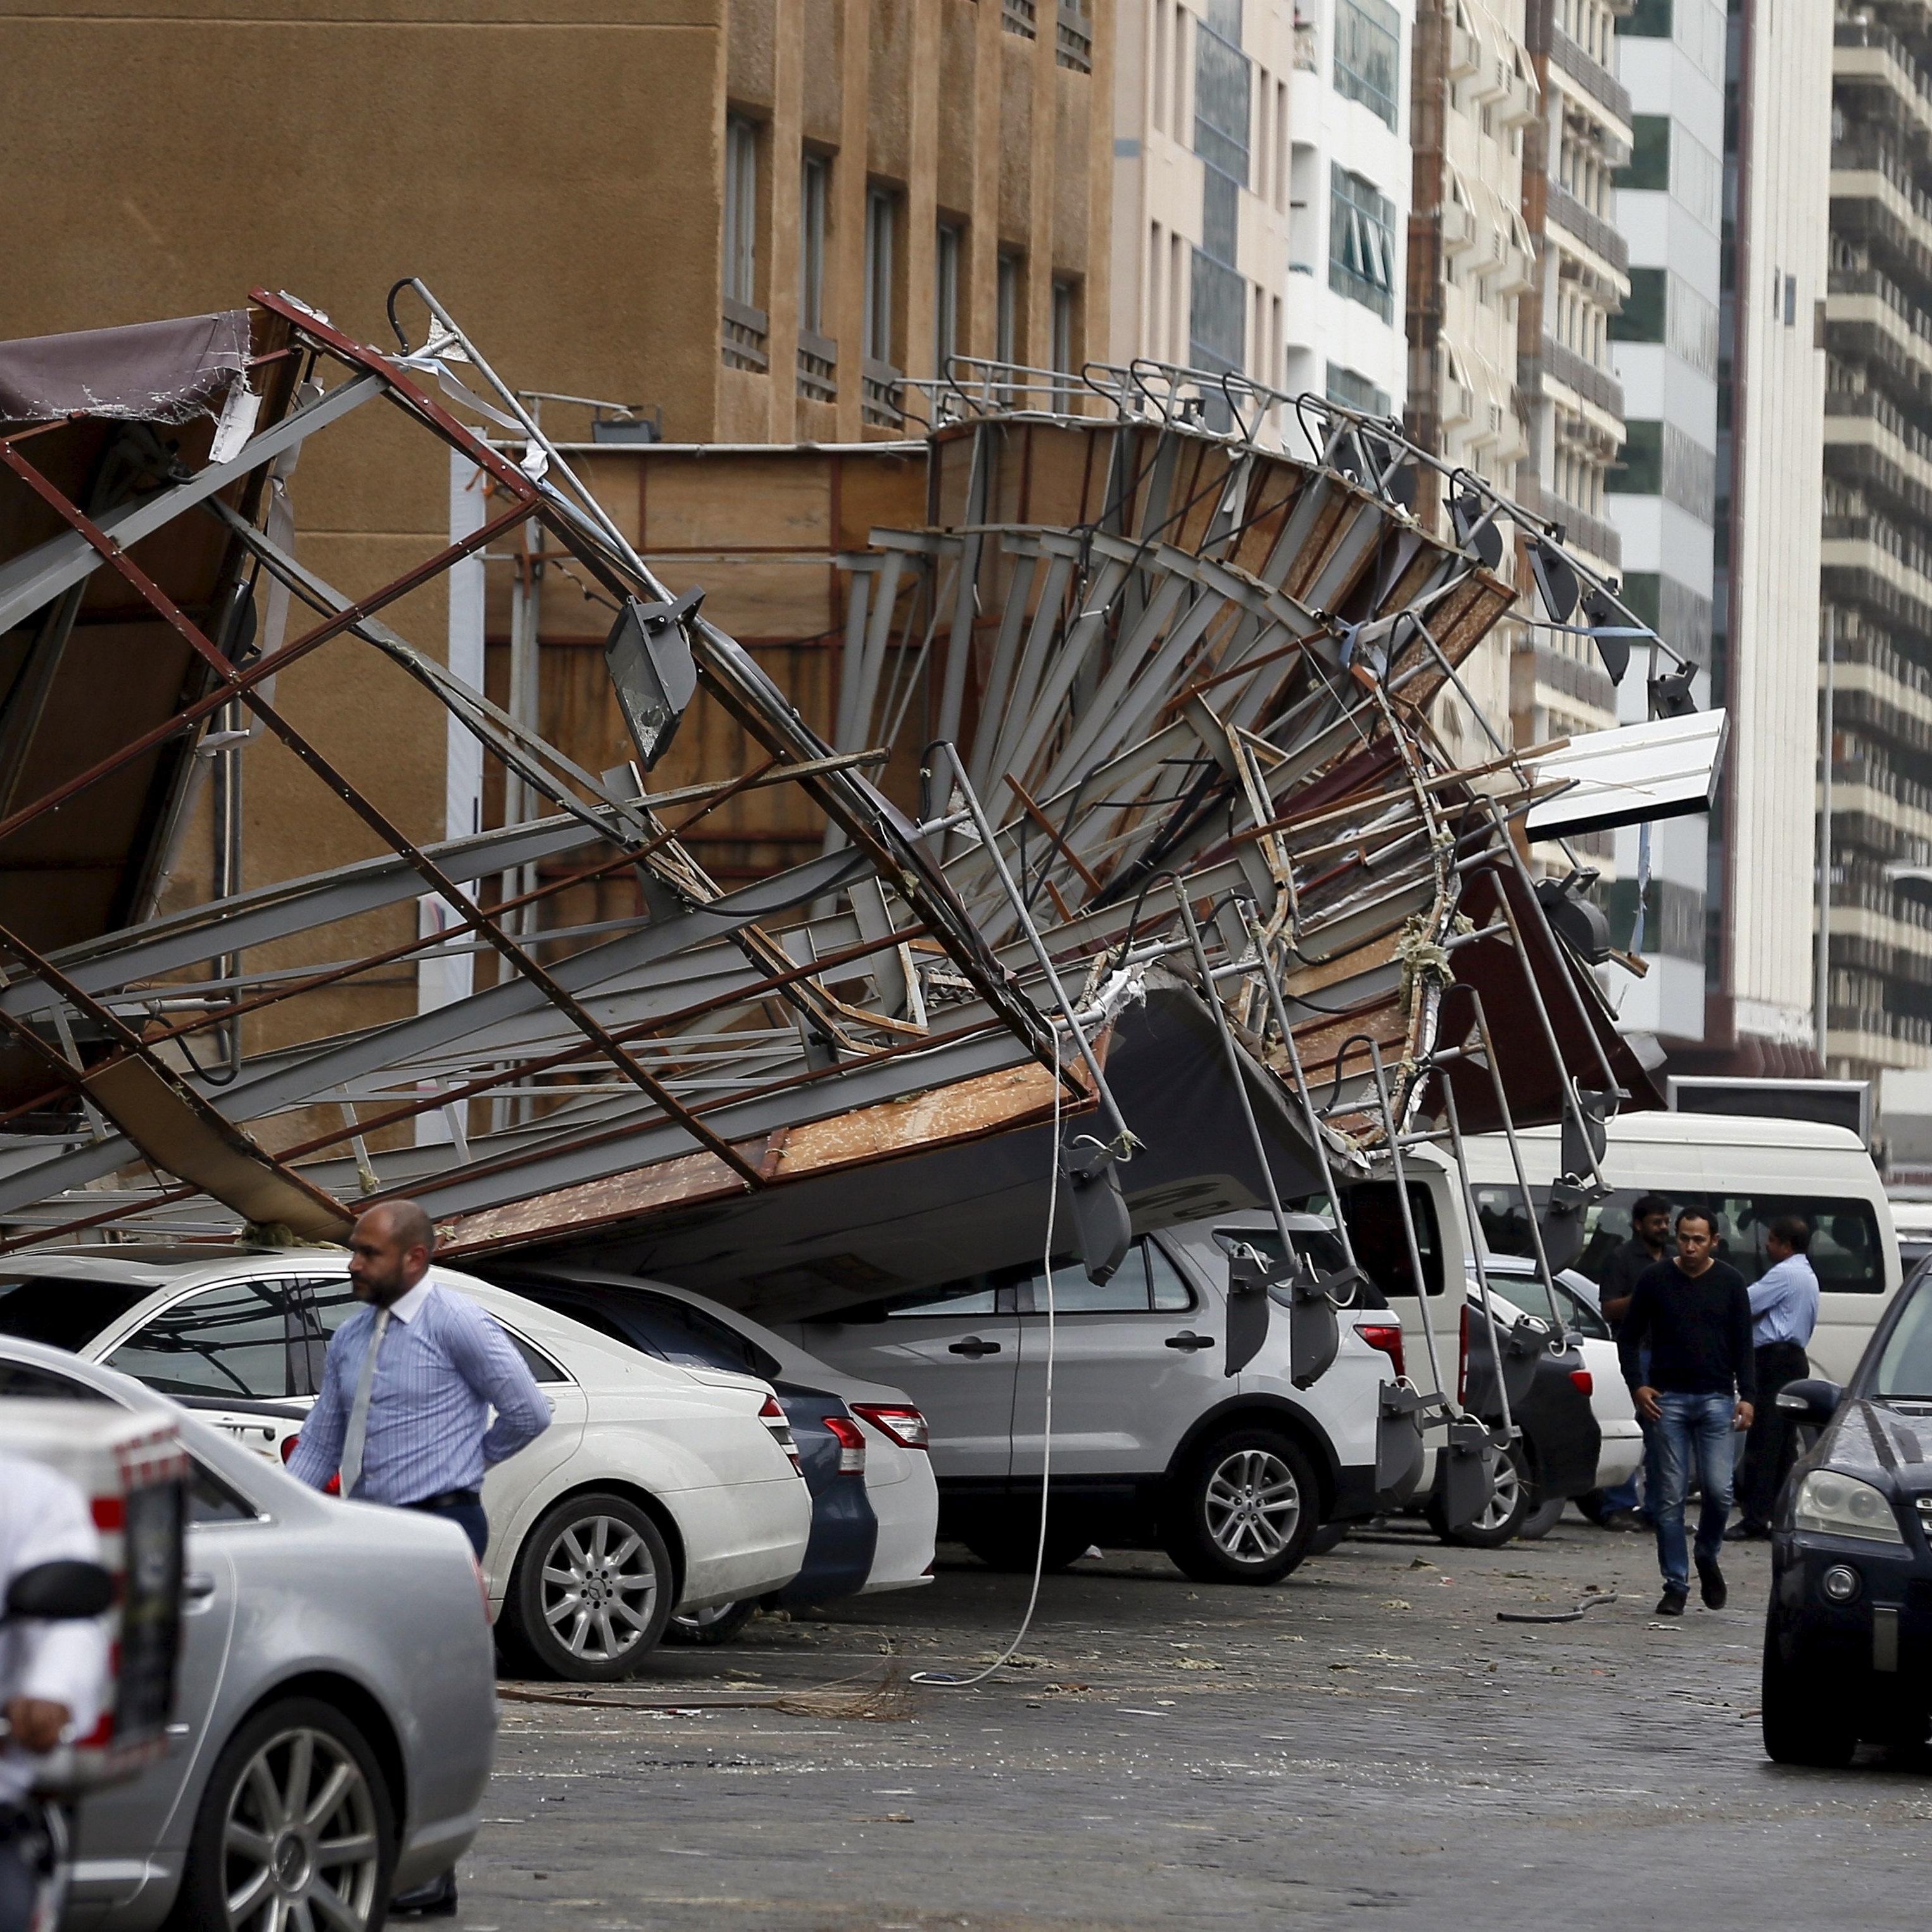 Abu Dhabi reviewing building rules after storm damage